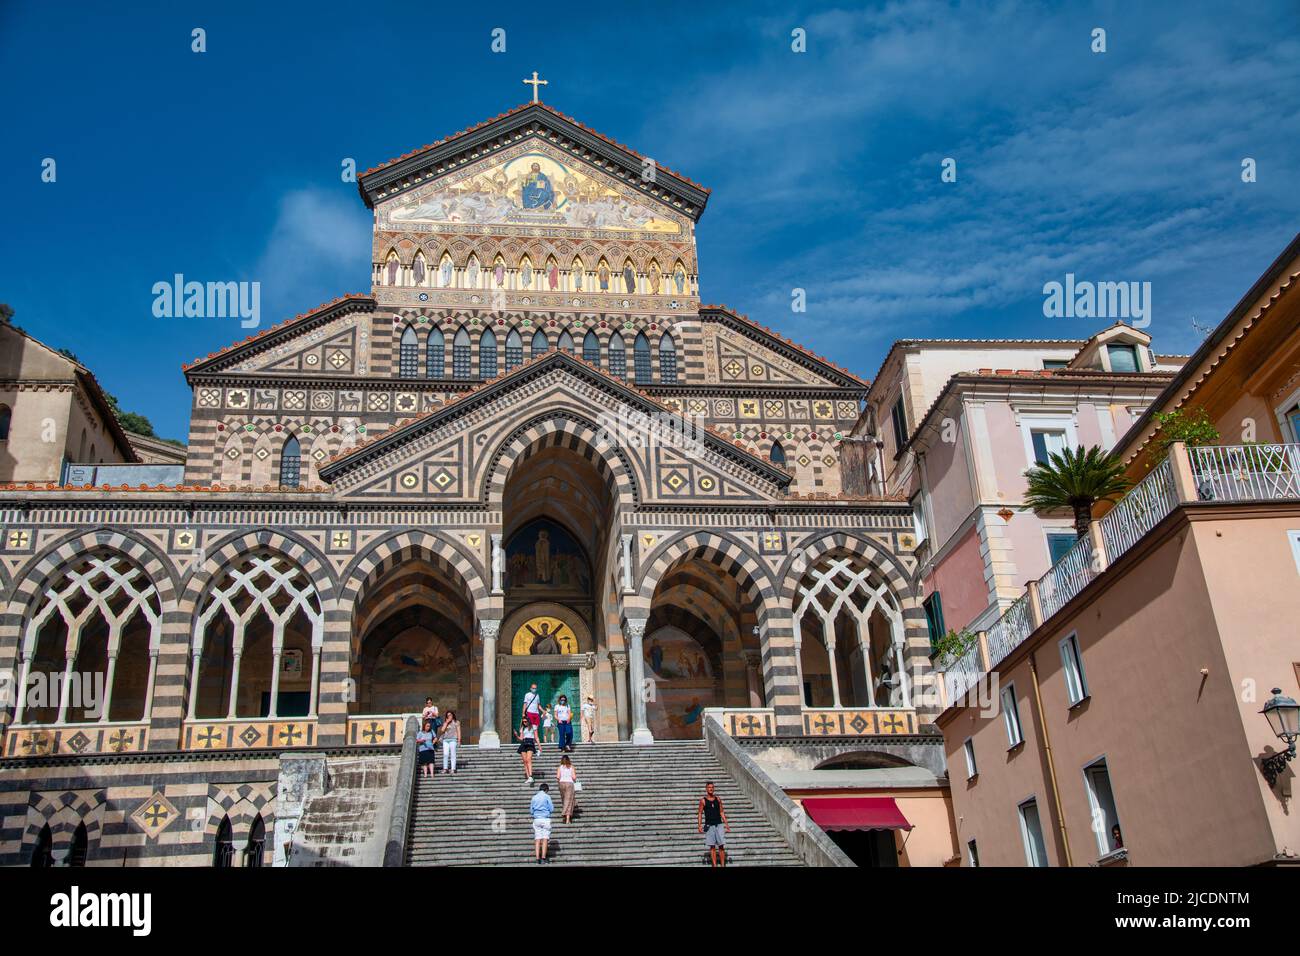 Amalfi, Italy - June 29, 2021: Amalfi cathedral with tourists on a sunny day. Stock Photo